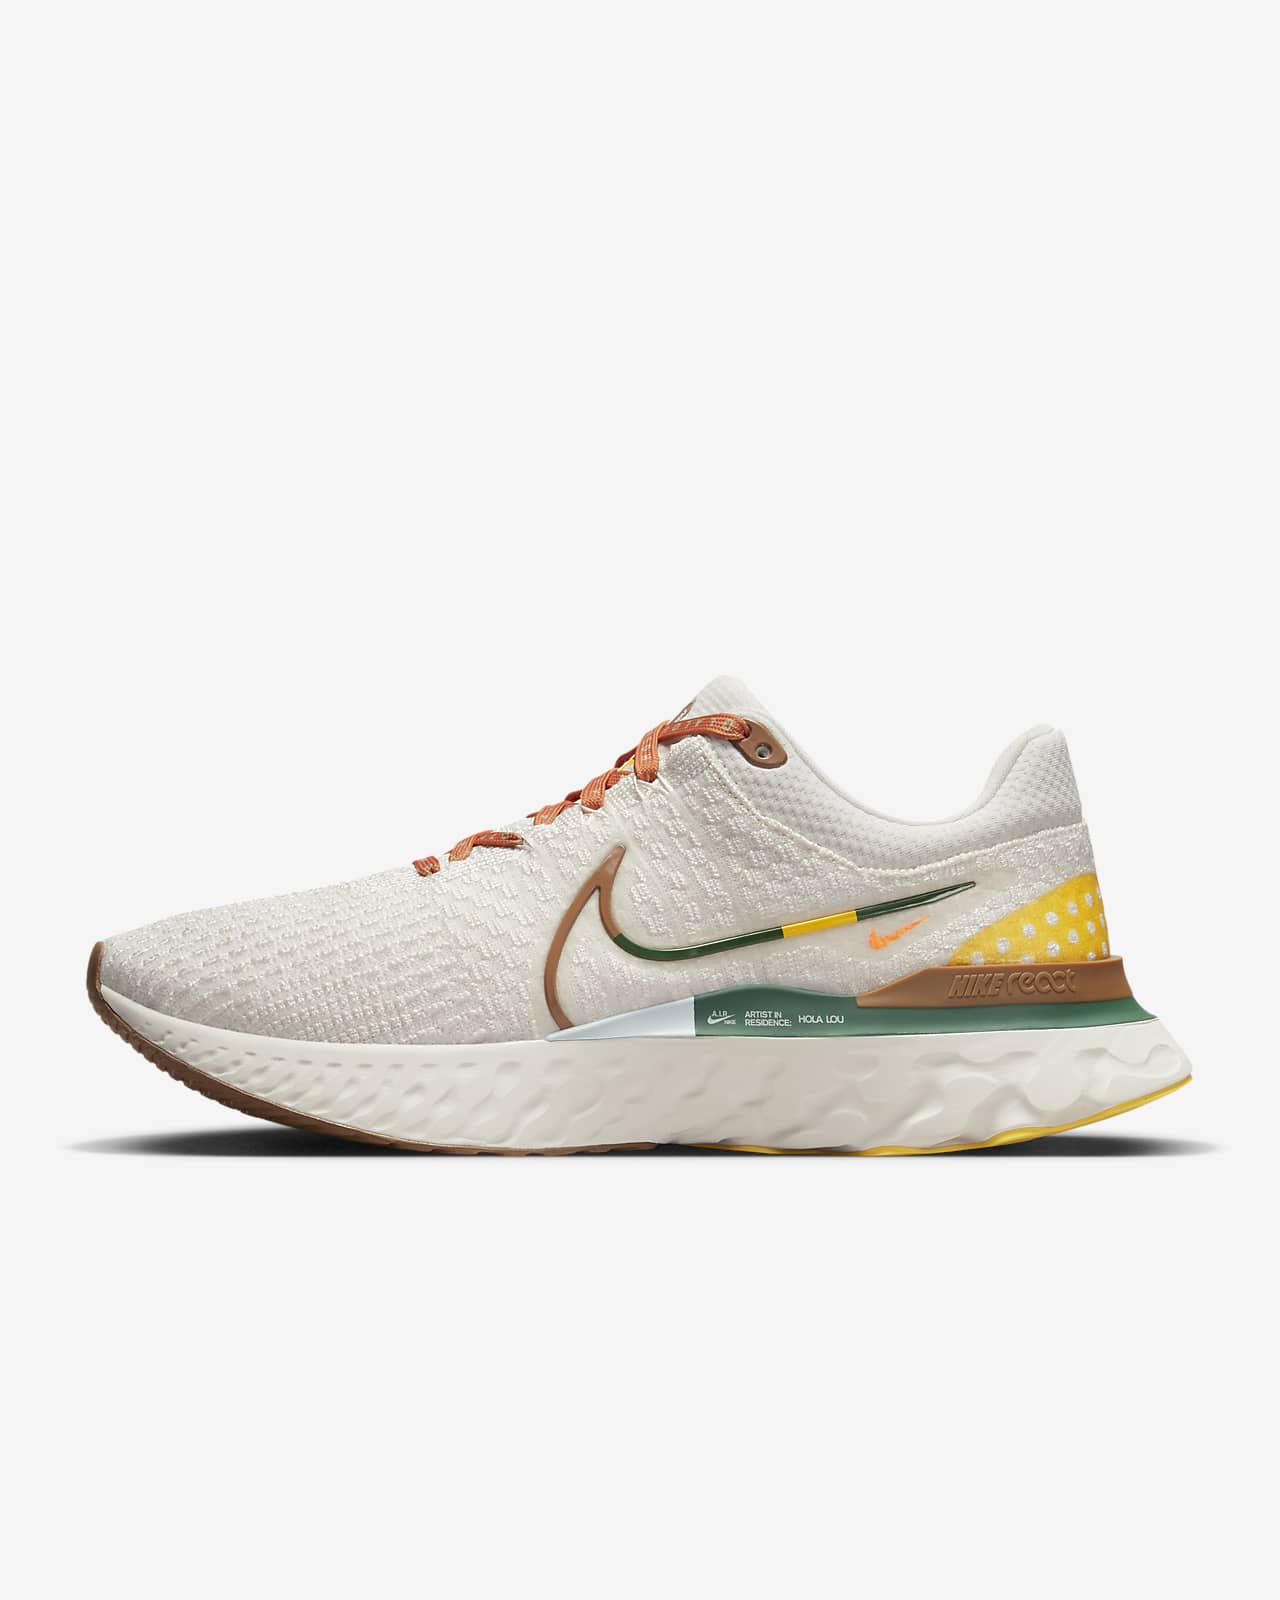 Chaussure de running sur route Nike Infinity Run 3 A.I.R. x Hola Lou pour Homme